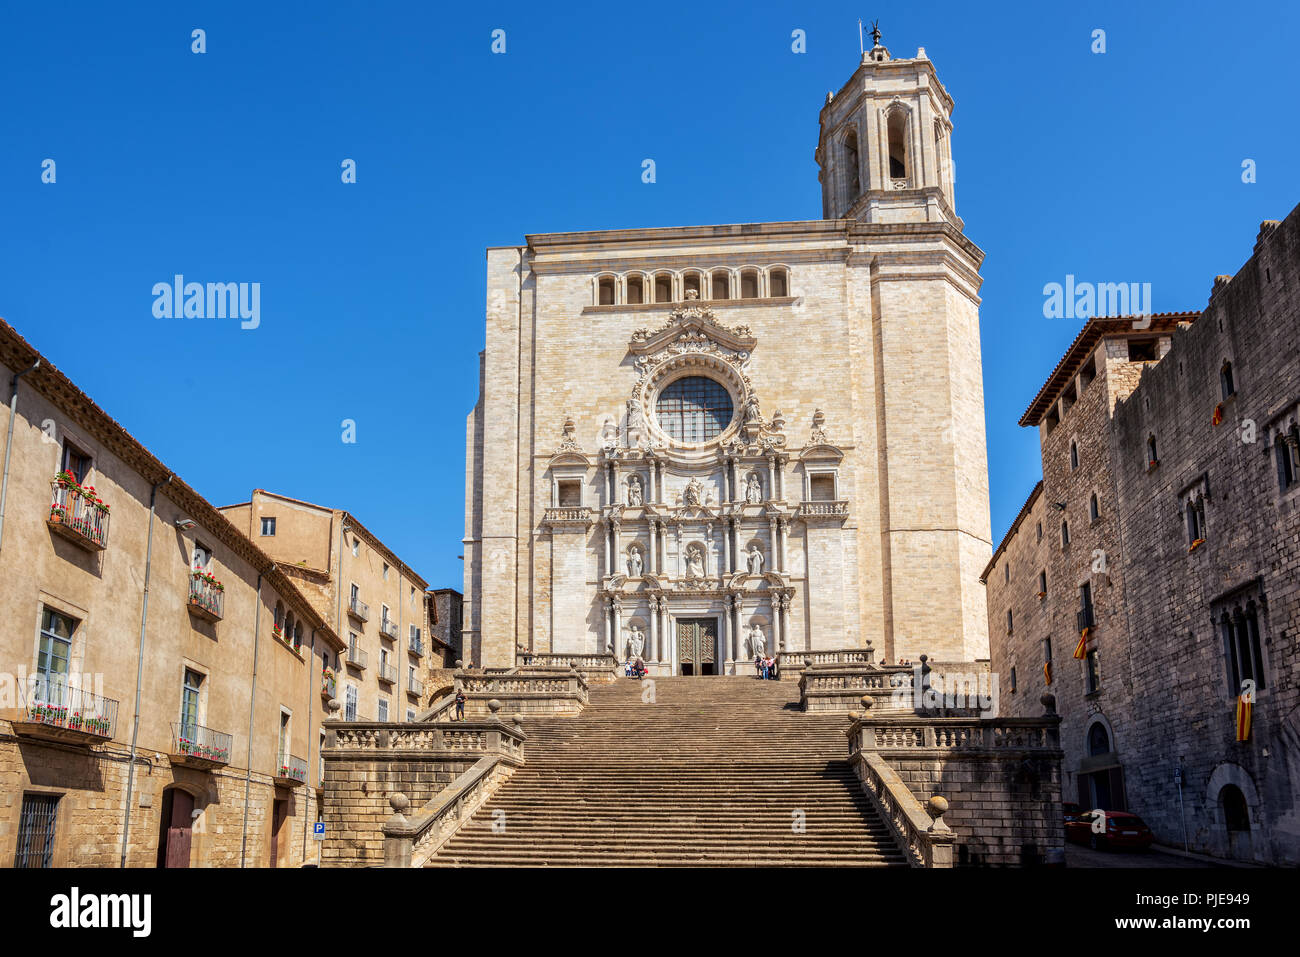 The main facade of the gothic style medieval Cathedral of Saint Mary in Girona Old Town, Catalonia, Spain Stock Photo